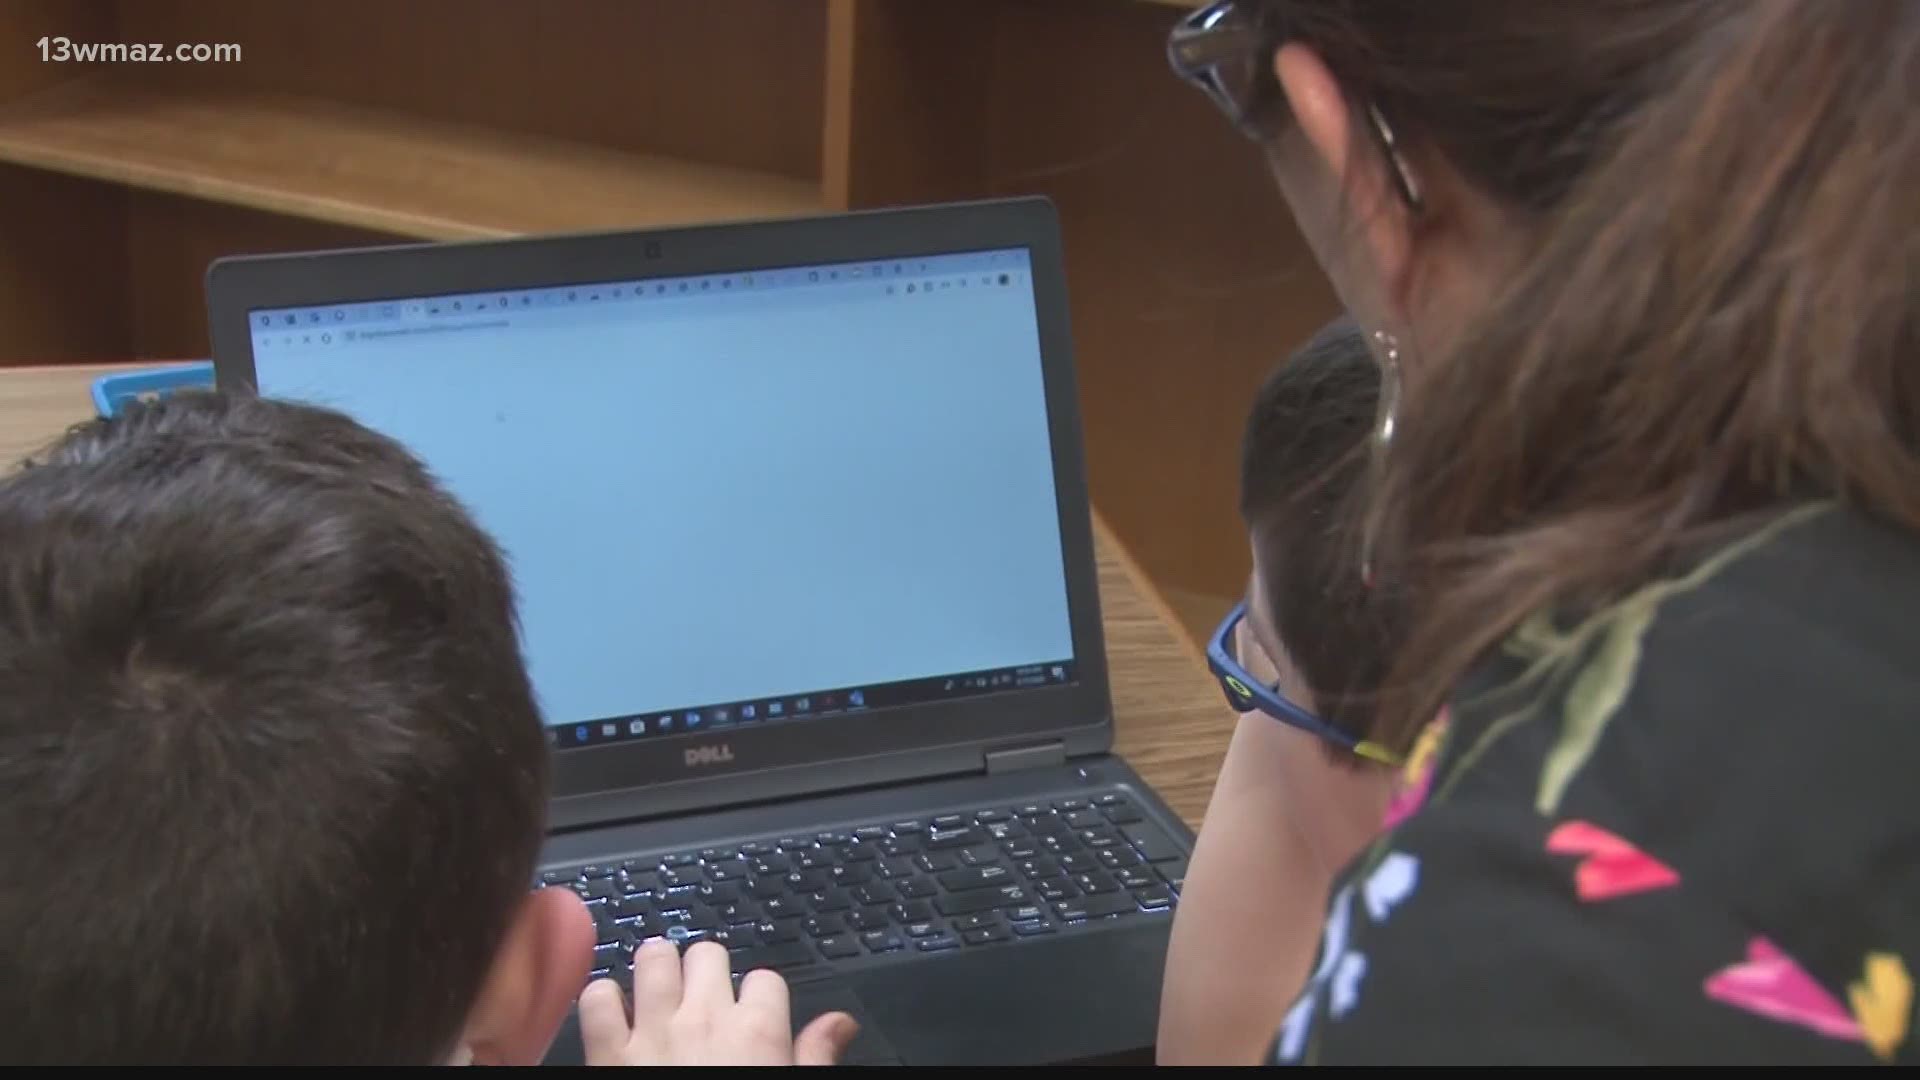 Students in Houston County have 2 options for the upcoming school year -- online or in-person learning.